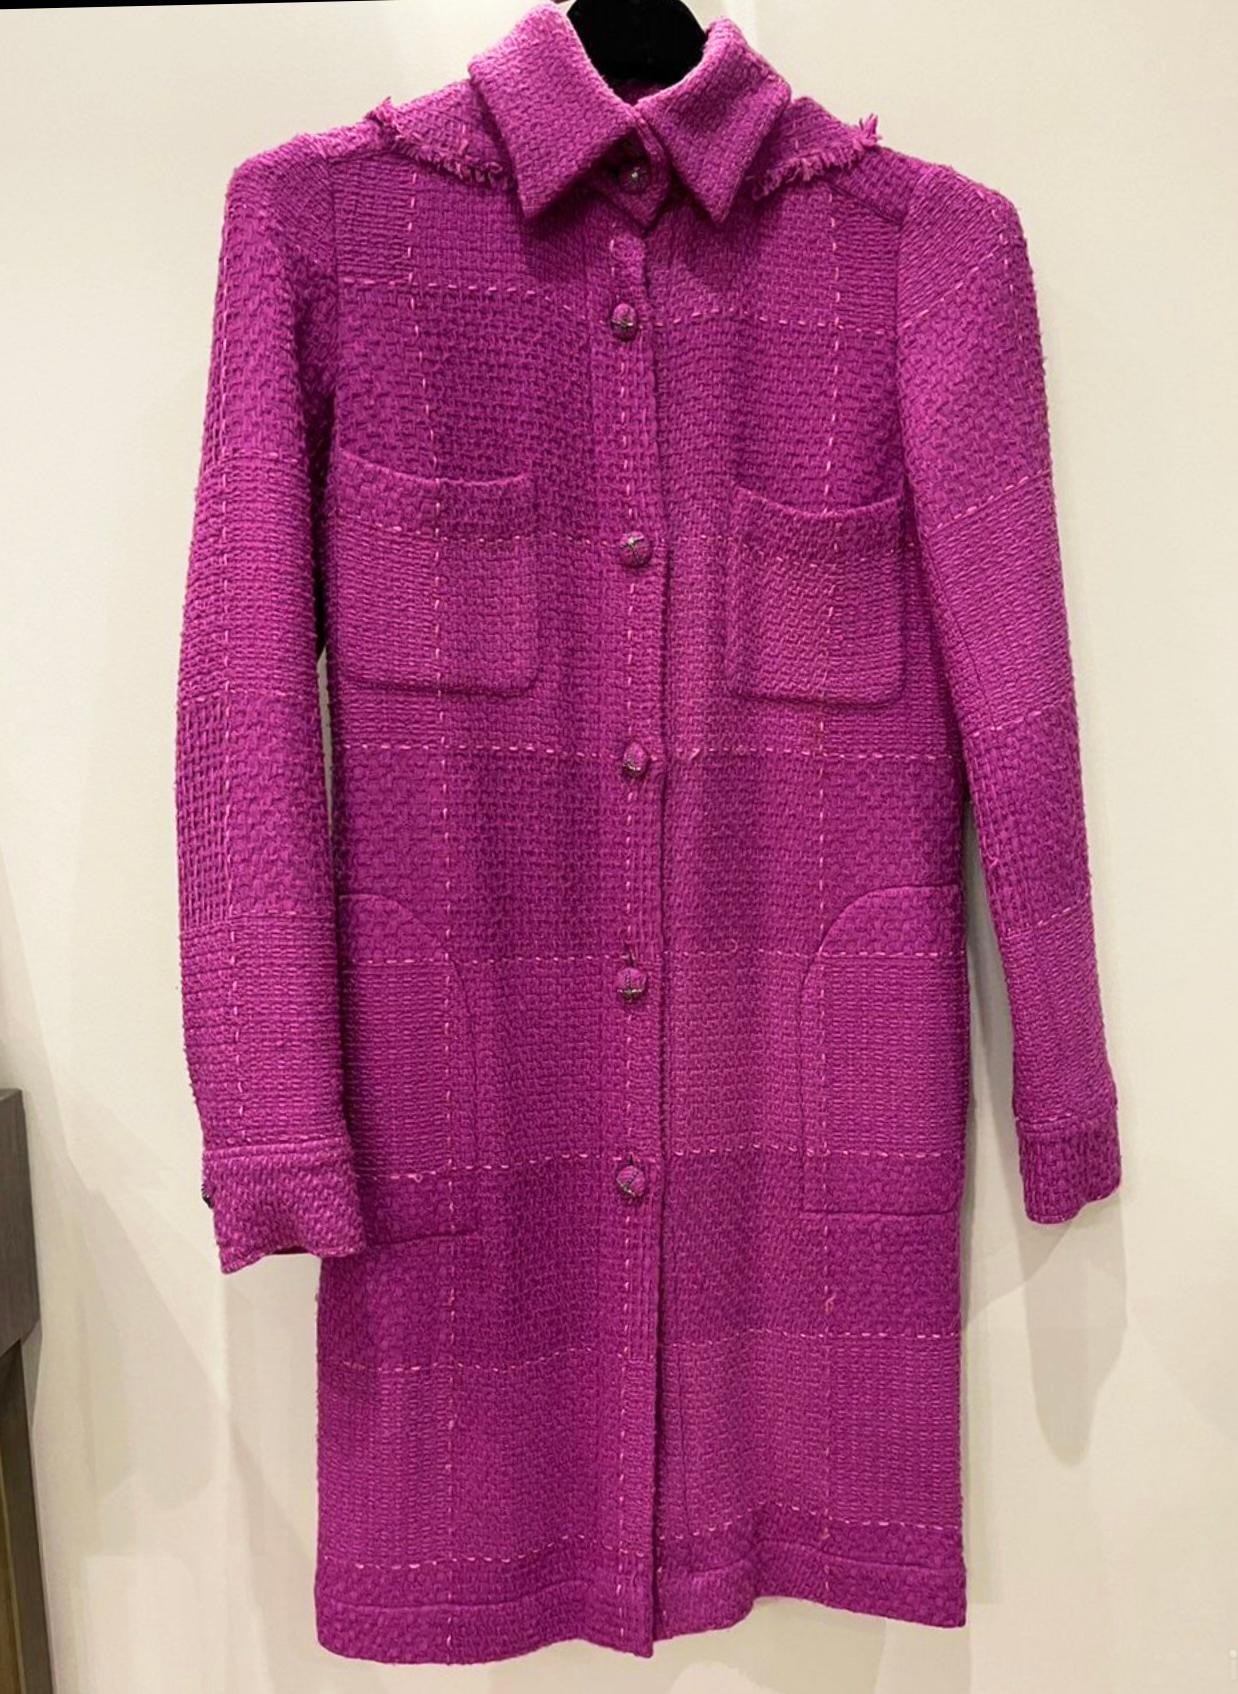 Chanel Paris / Monaco CC Buttons Lesage Tweed Trench Coat  In Excellent Condition For Sale In Dubai, AE